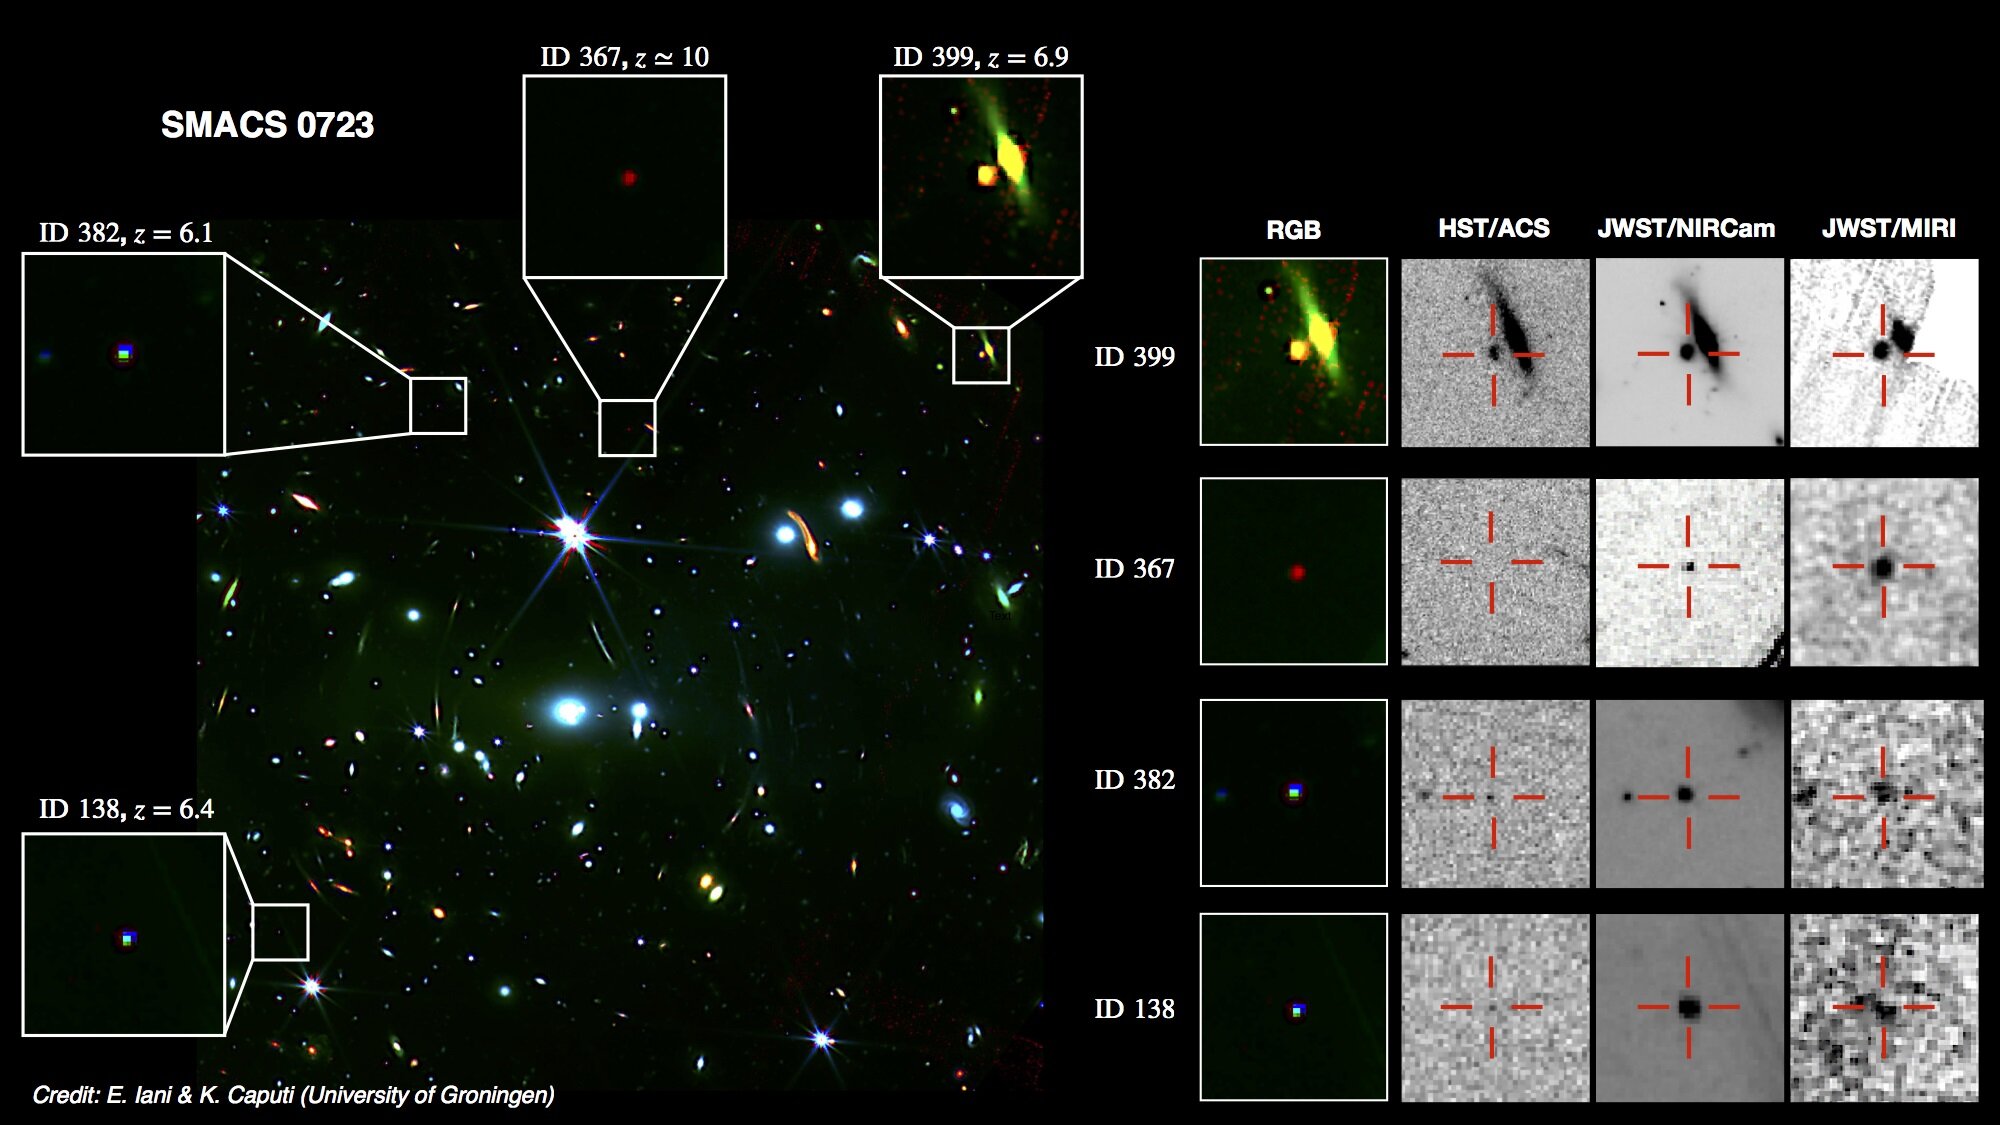 Infrared capabilities of JWST reveal earliest galaxies in the young universe